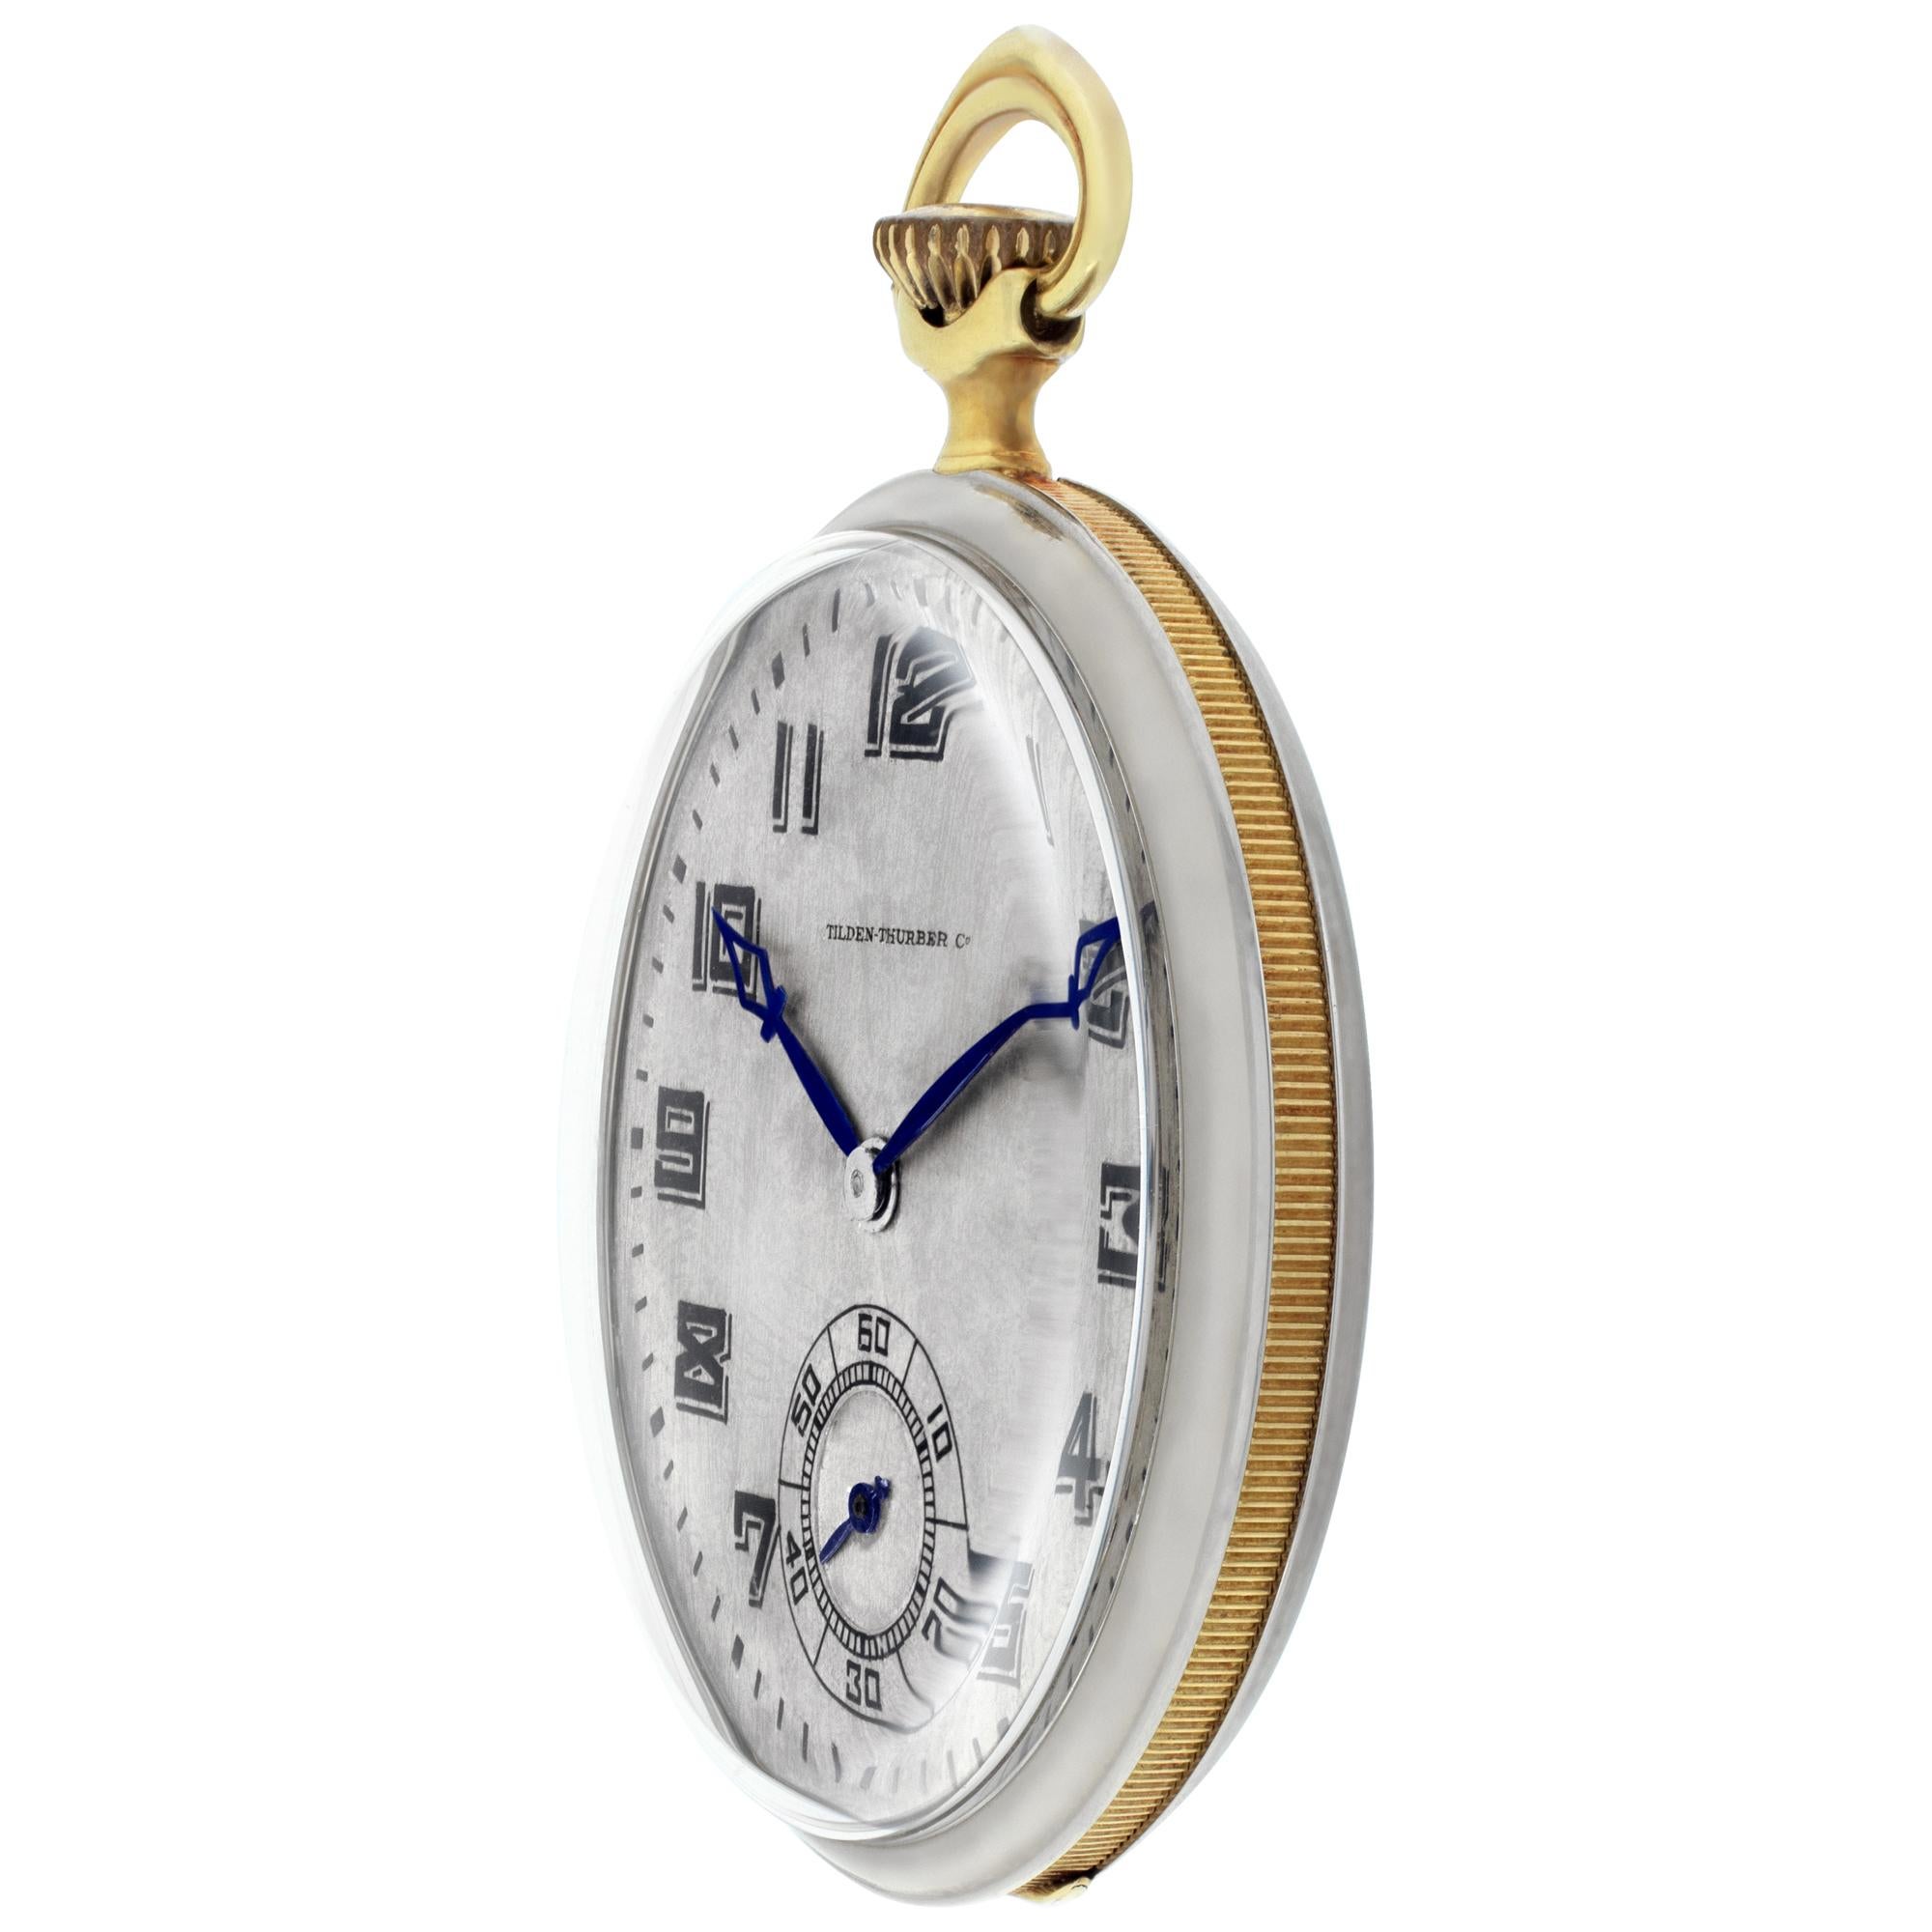 Tilden Thurber pocket watch in 18k yellow & white gold. Manual wind Longines movement w/ sub-seconds. High-grade, thin profile. Fine Pre-owned Longines Watch. Certified preowned Vintage Longines Tilden Tur watch is made out of white gold. This